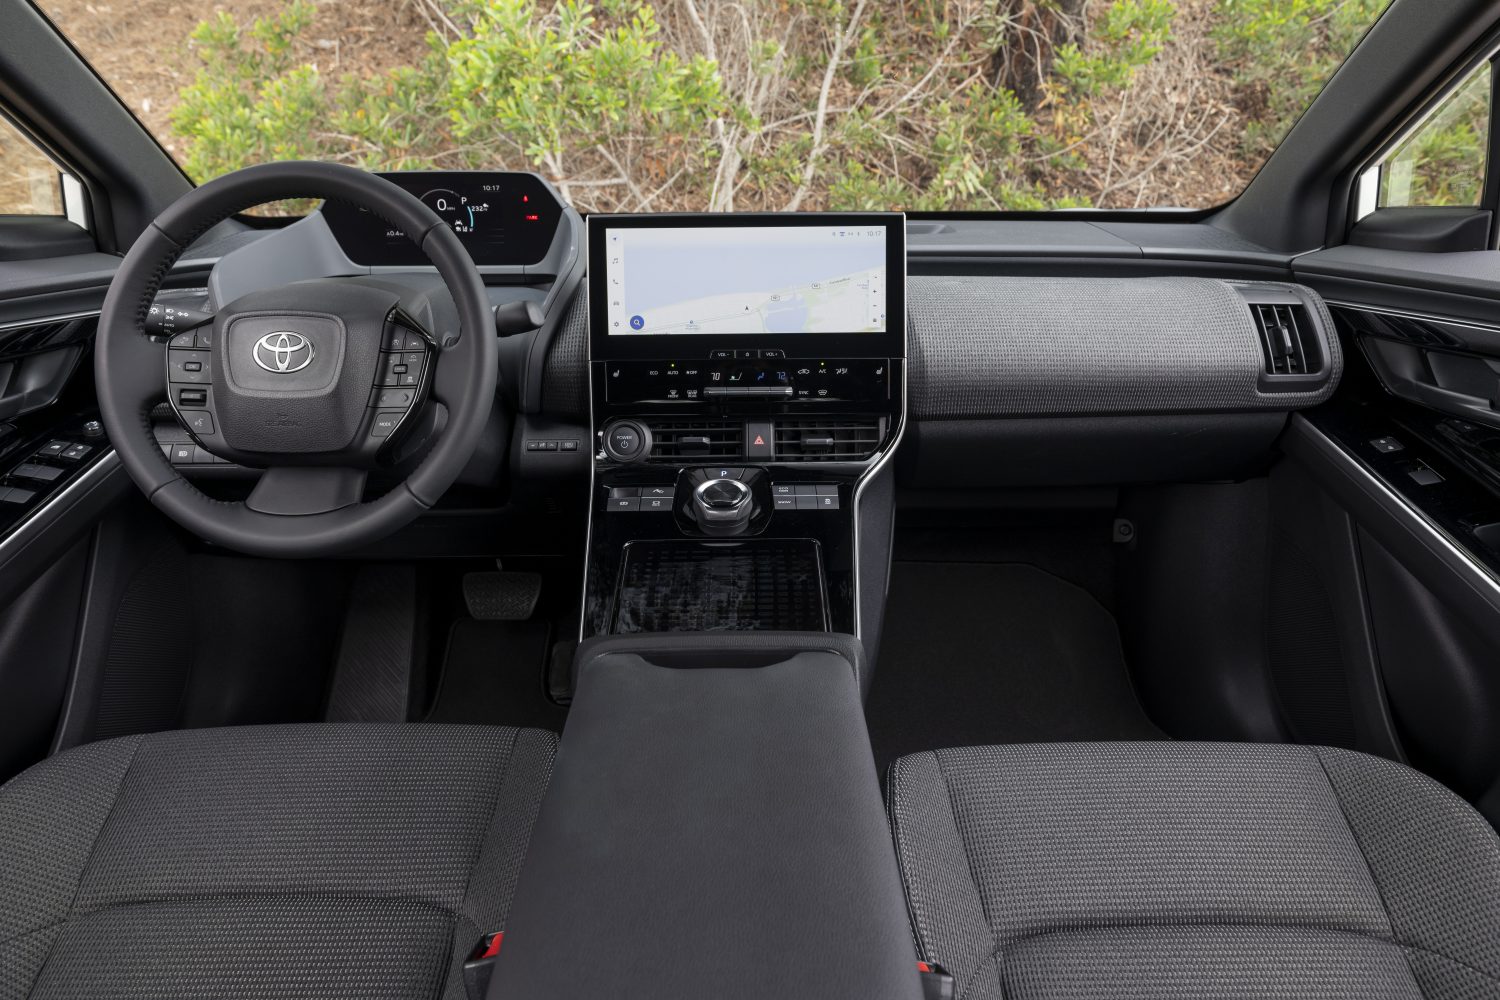 The front seating area and dashboard of the Toyota BZ4X